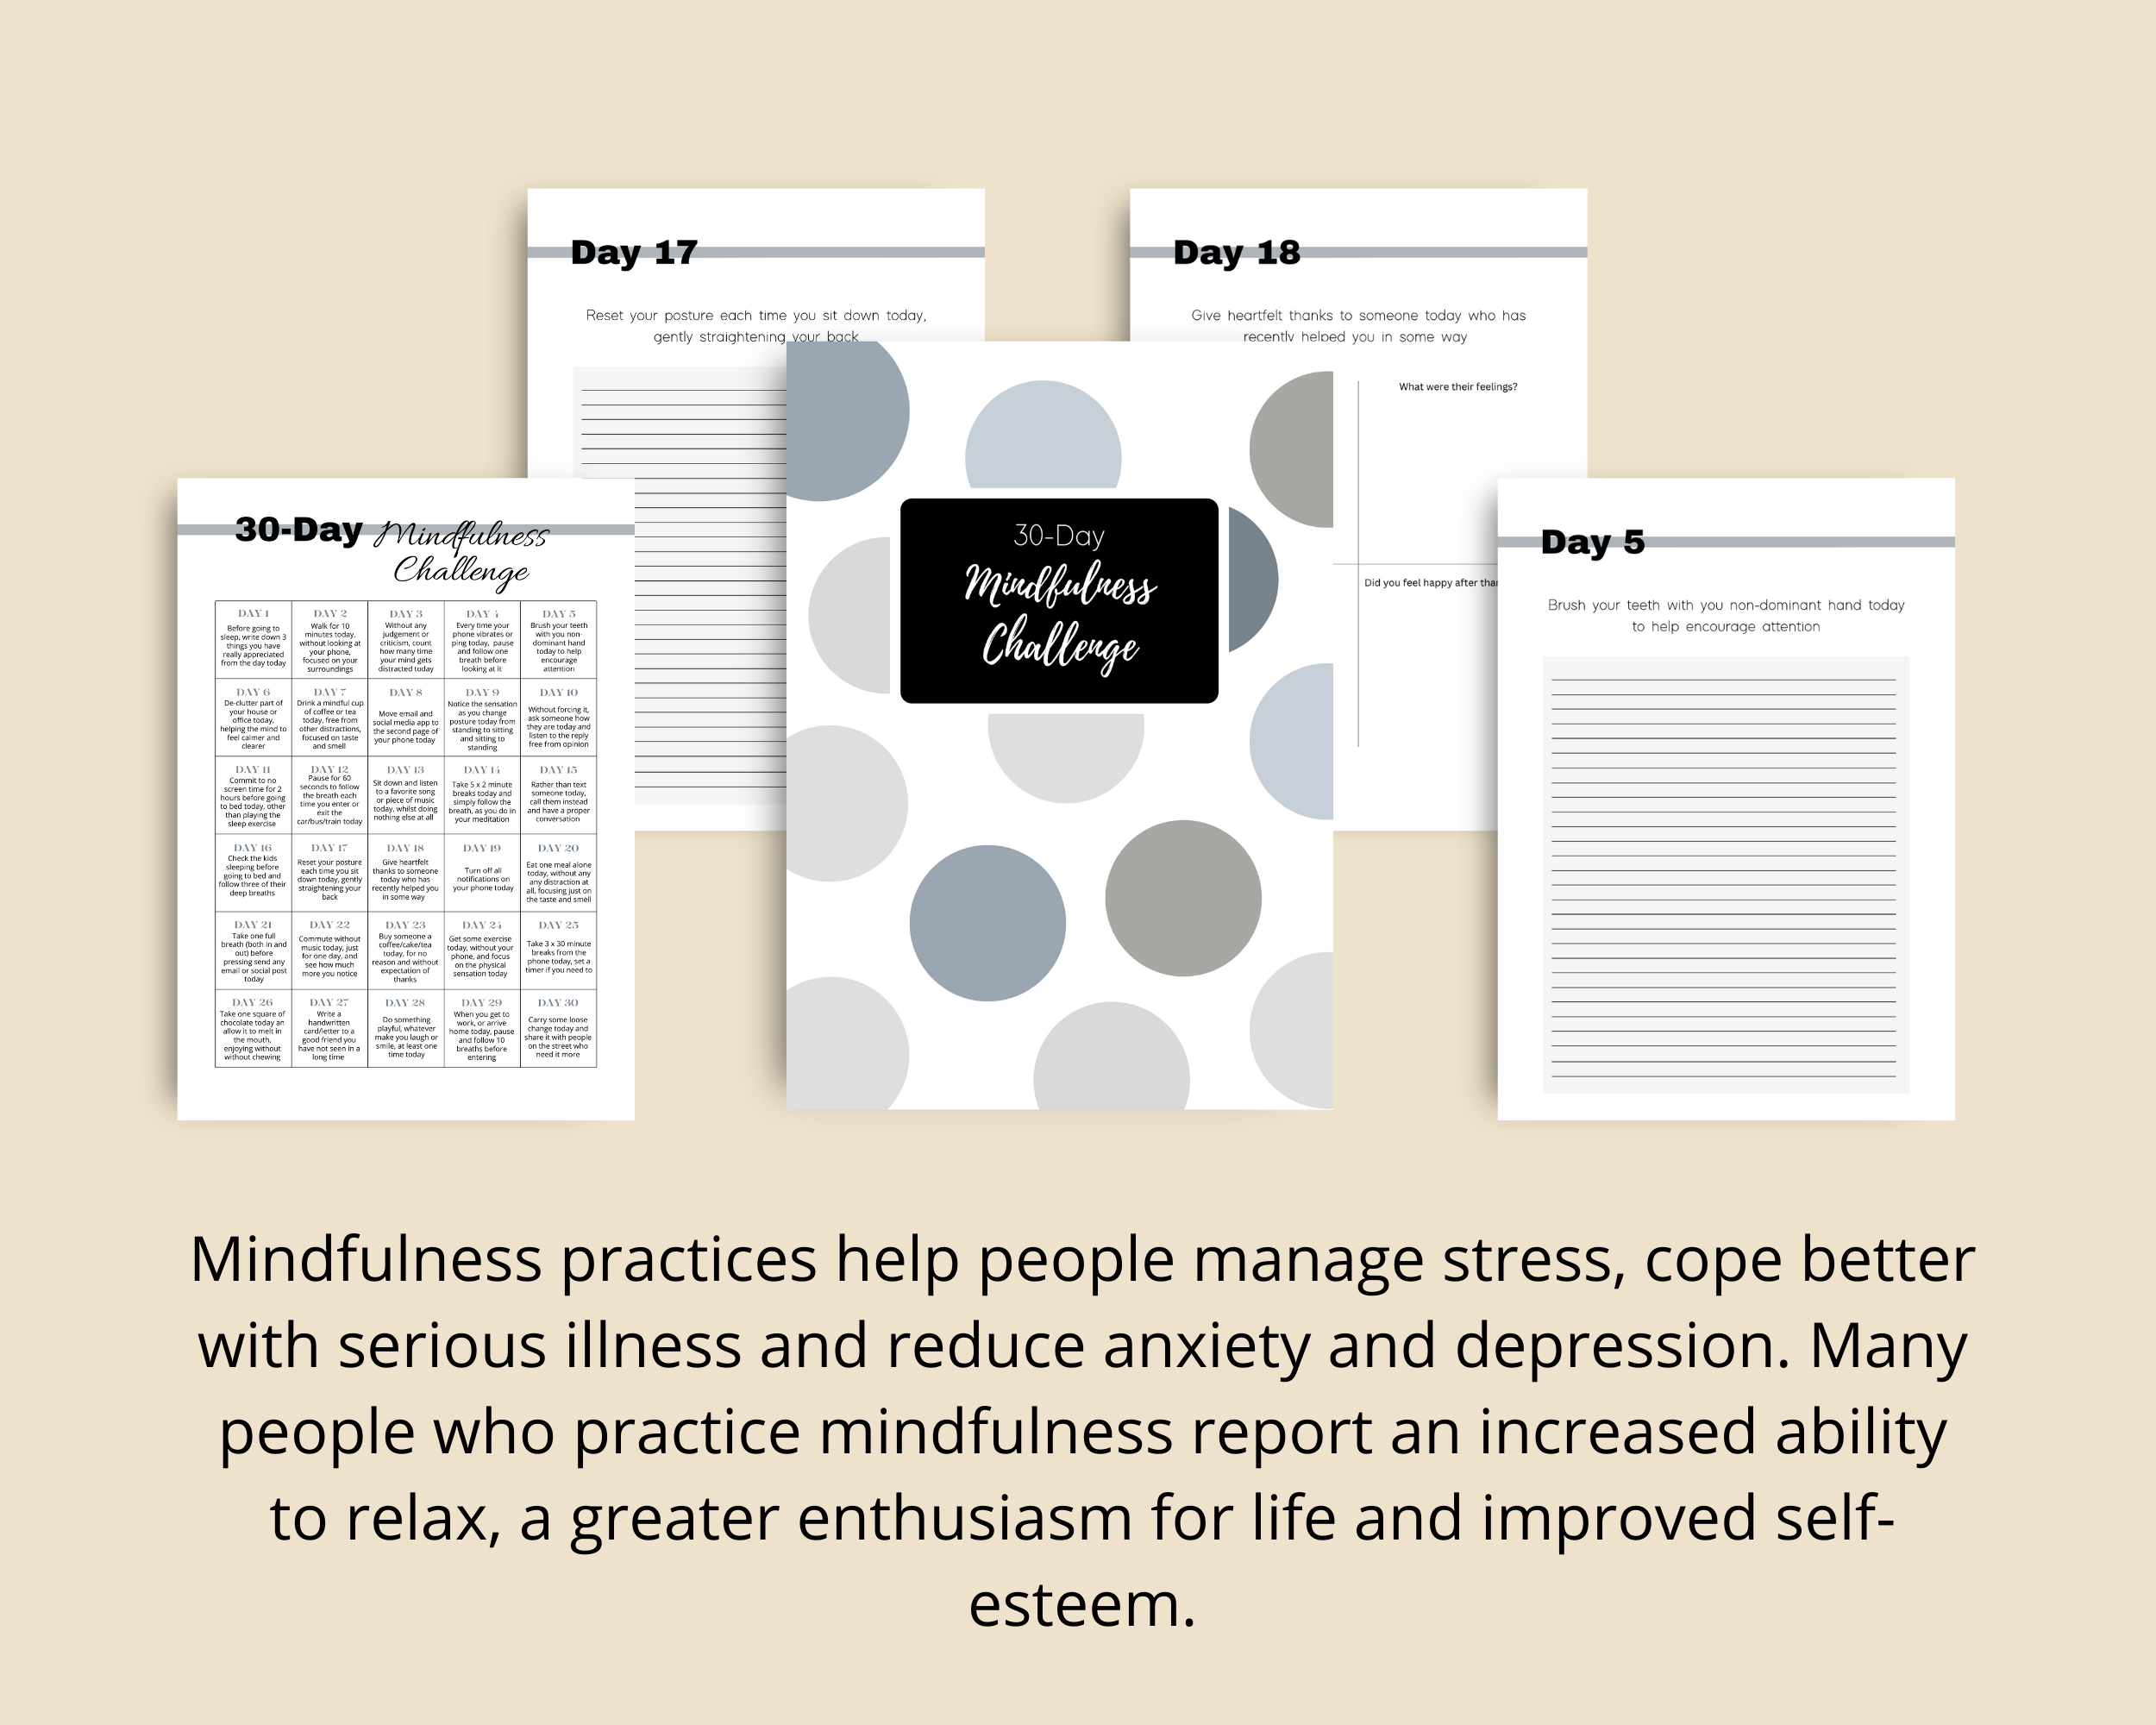 30-Day Mindfulness Challenge | Editable Canva Template A4 Size